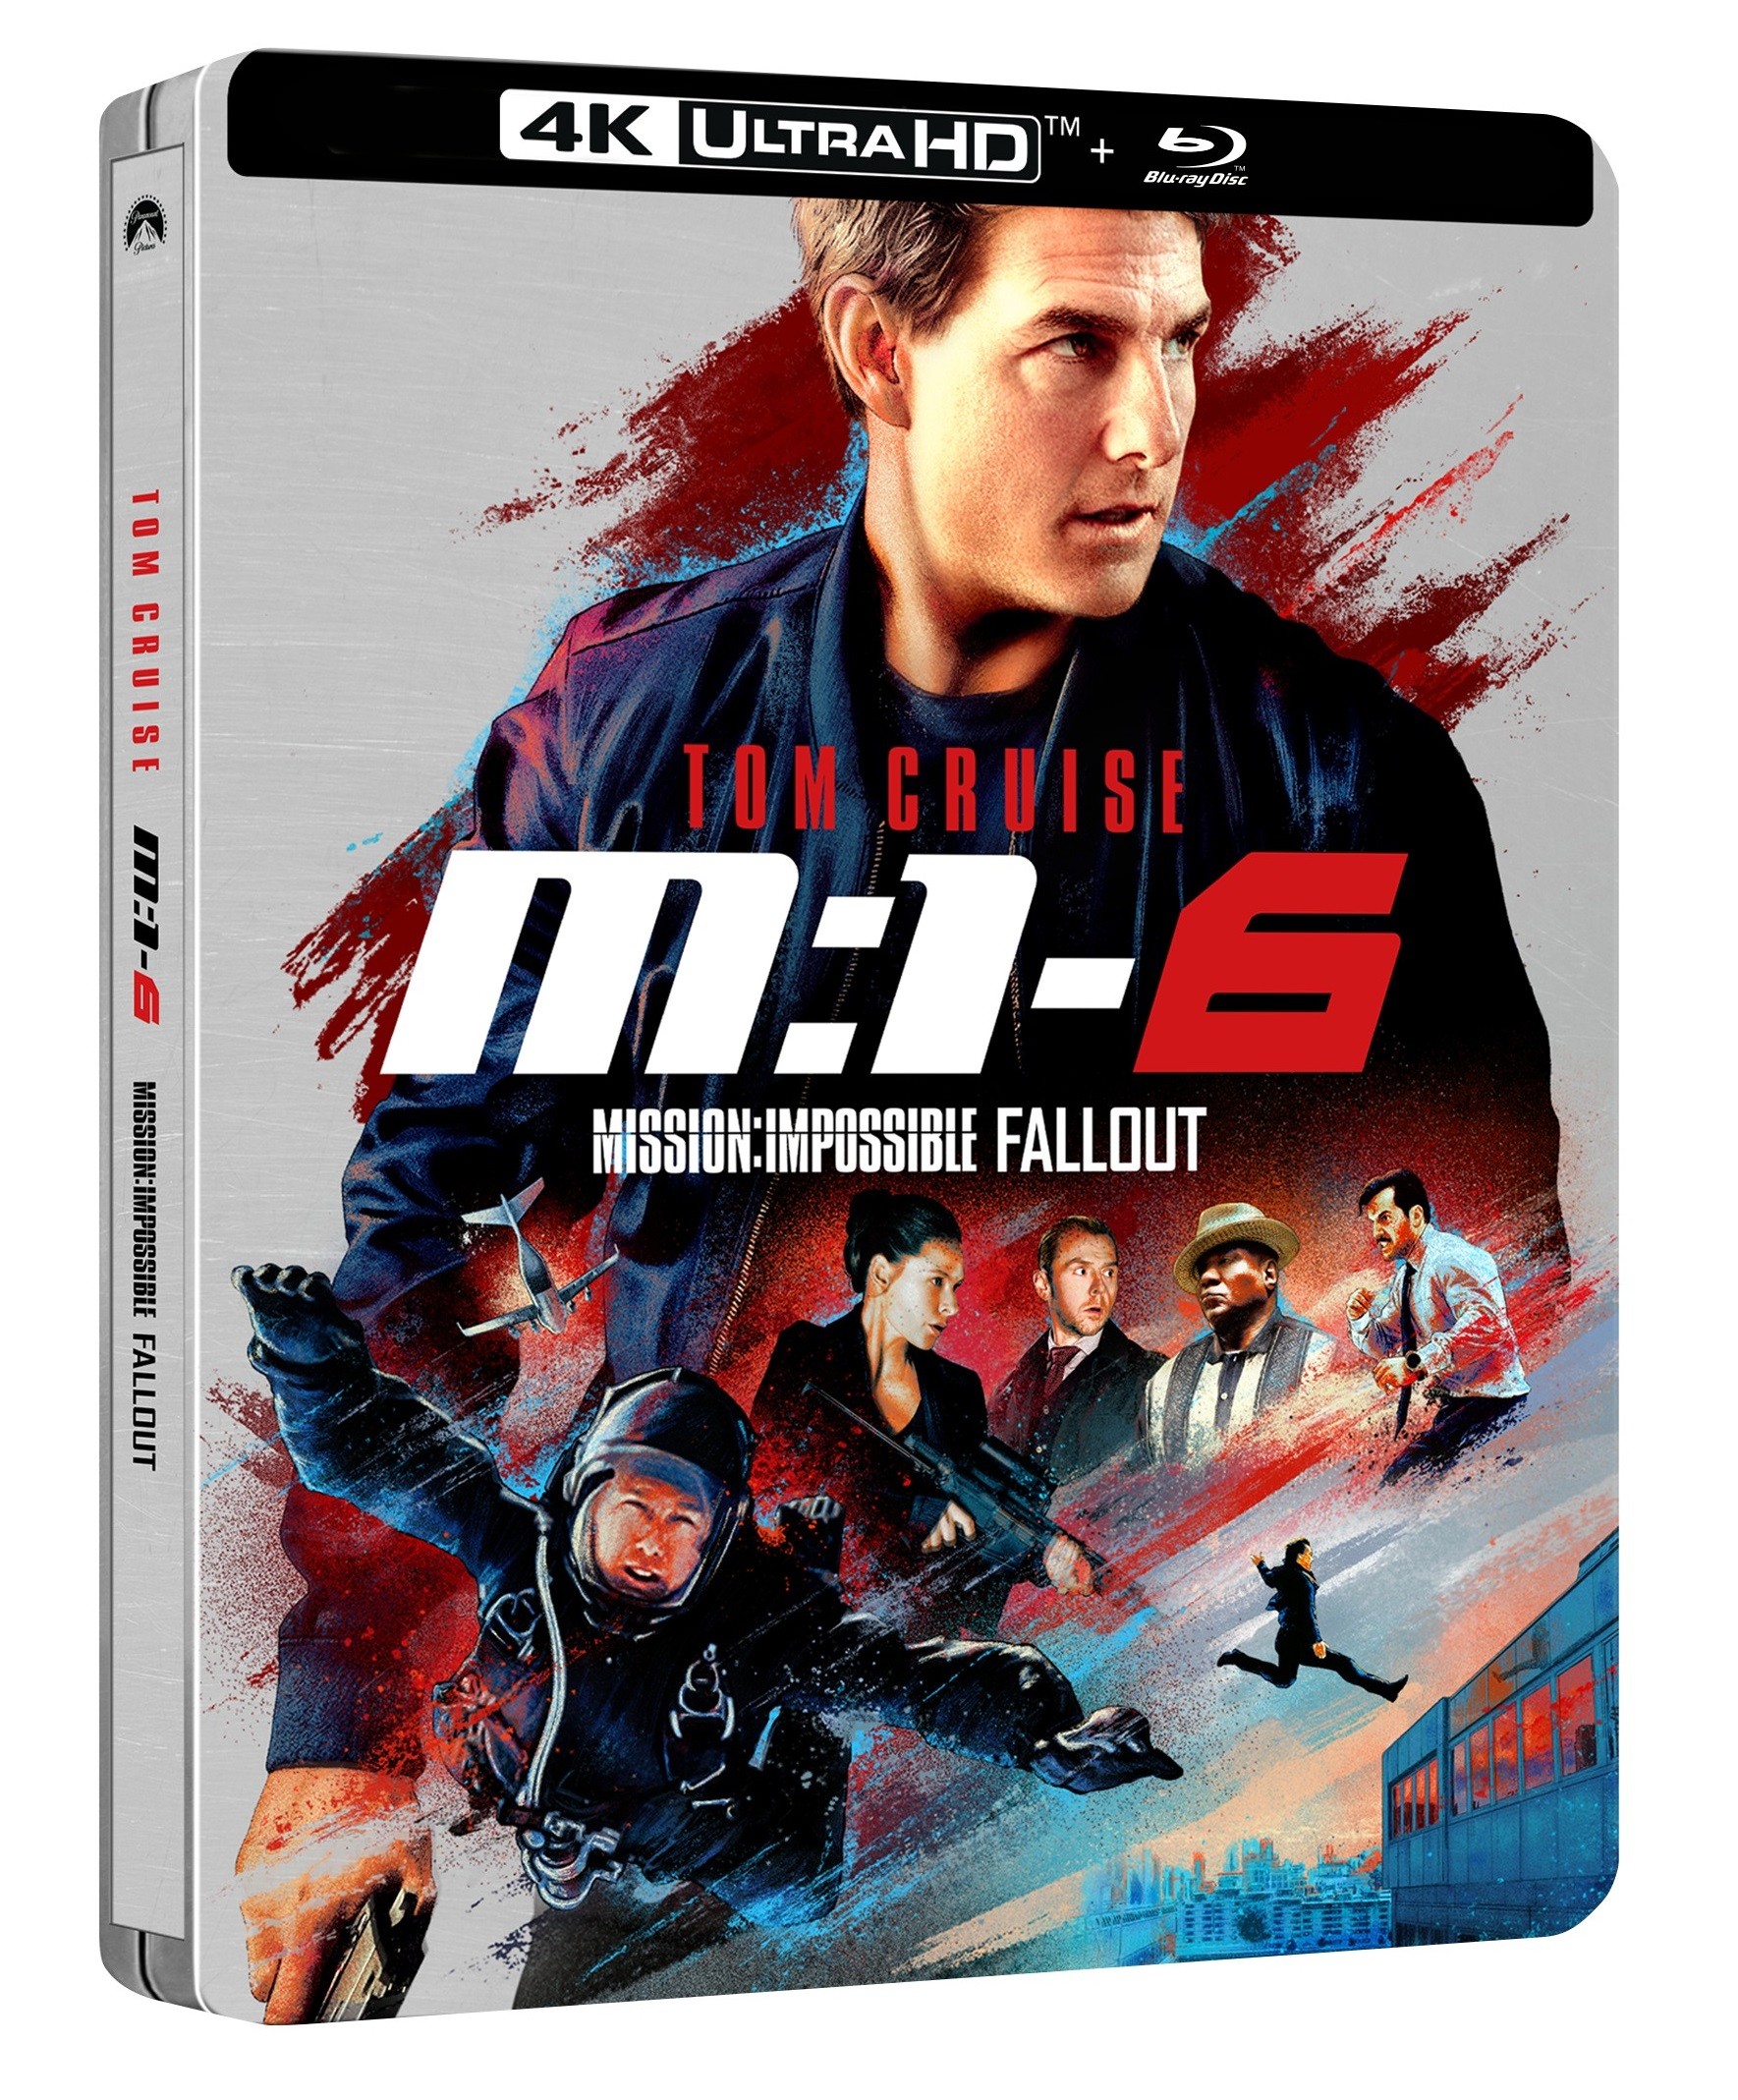 MISSION IMPOSSIBLE 6 : FALLOUT - COMBO UHD 4K + BD - STEELBOOK EDITION LIMITEE